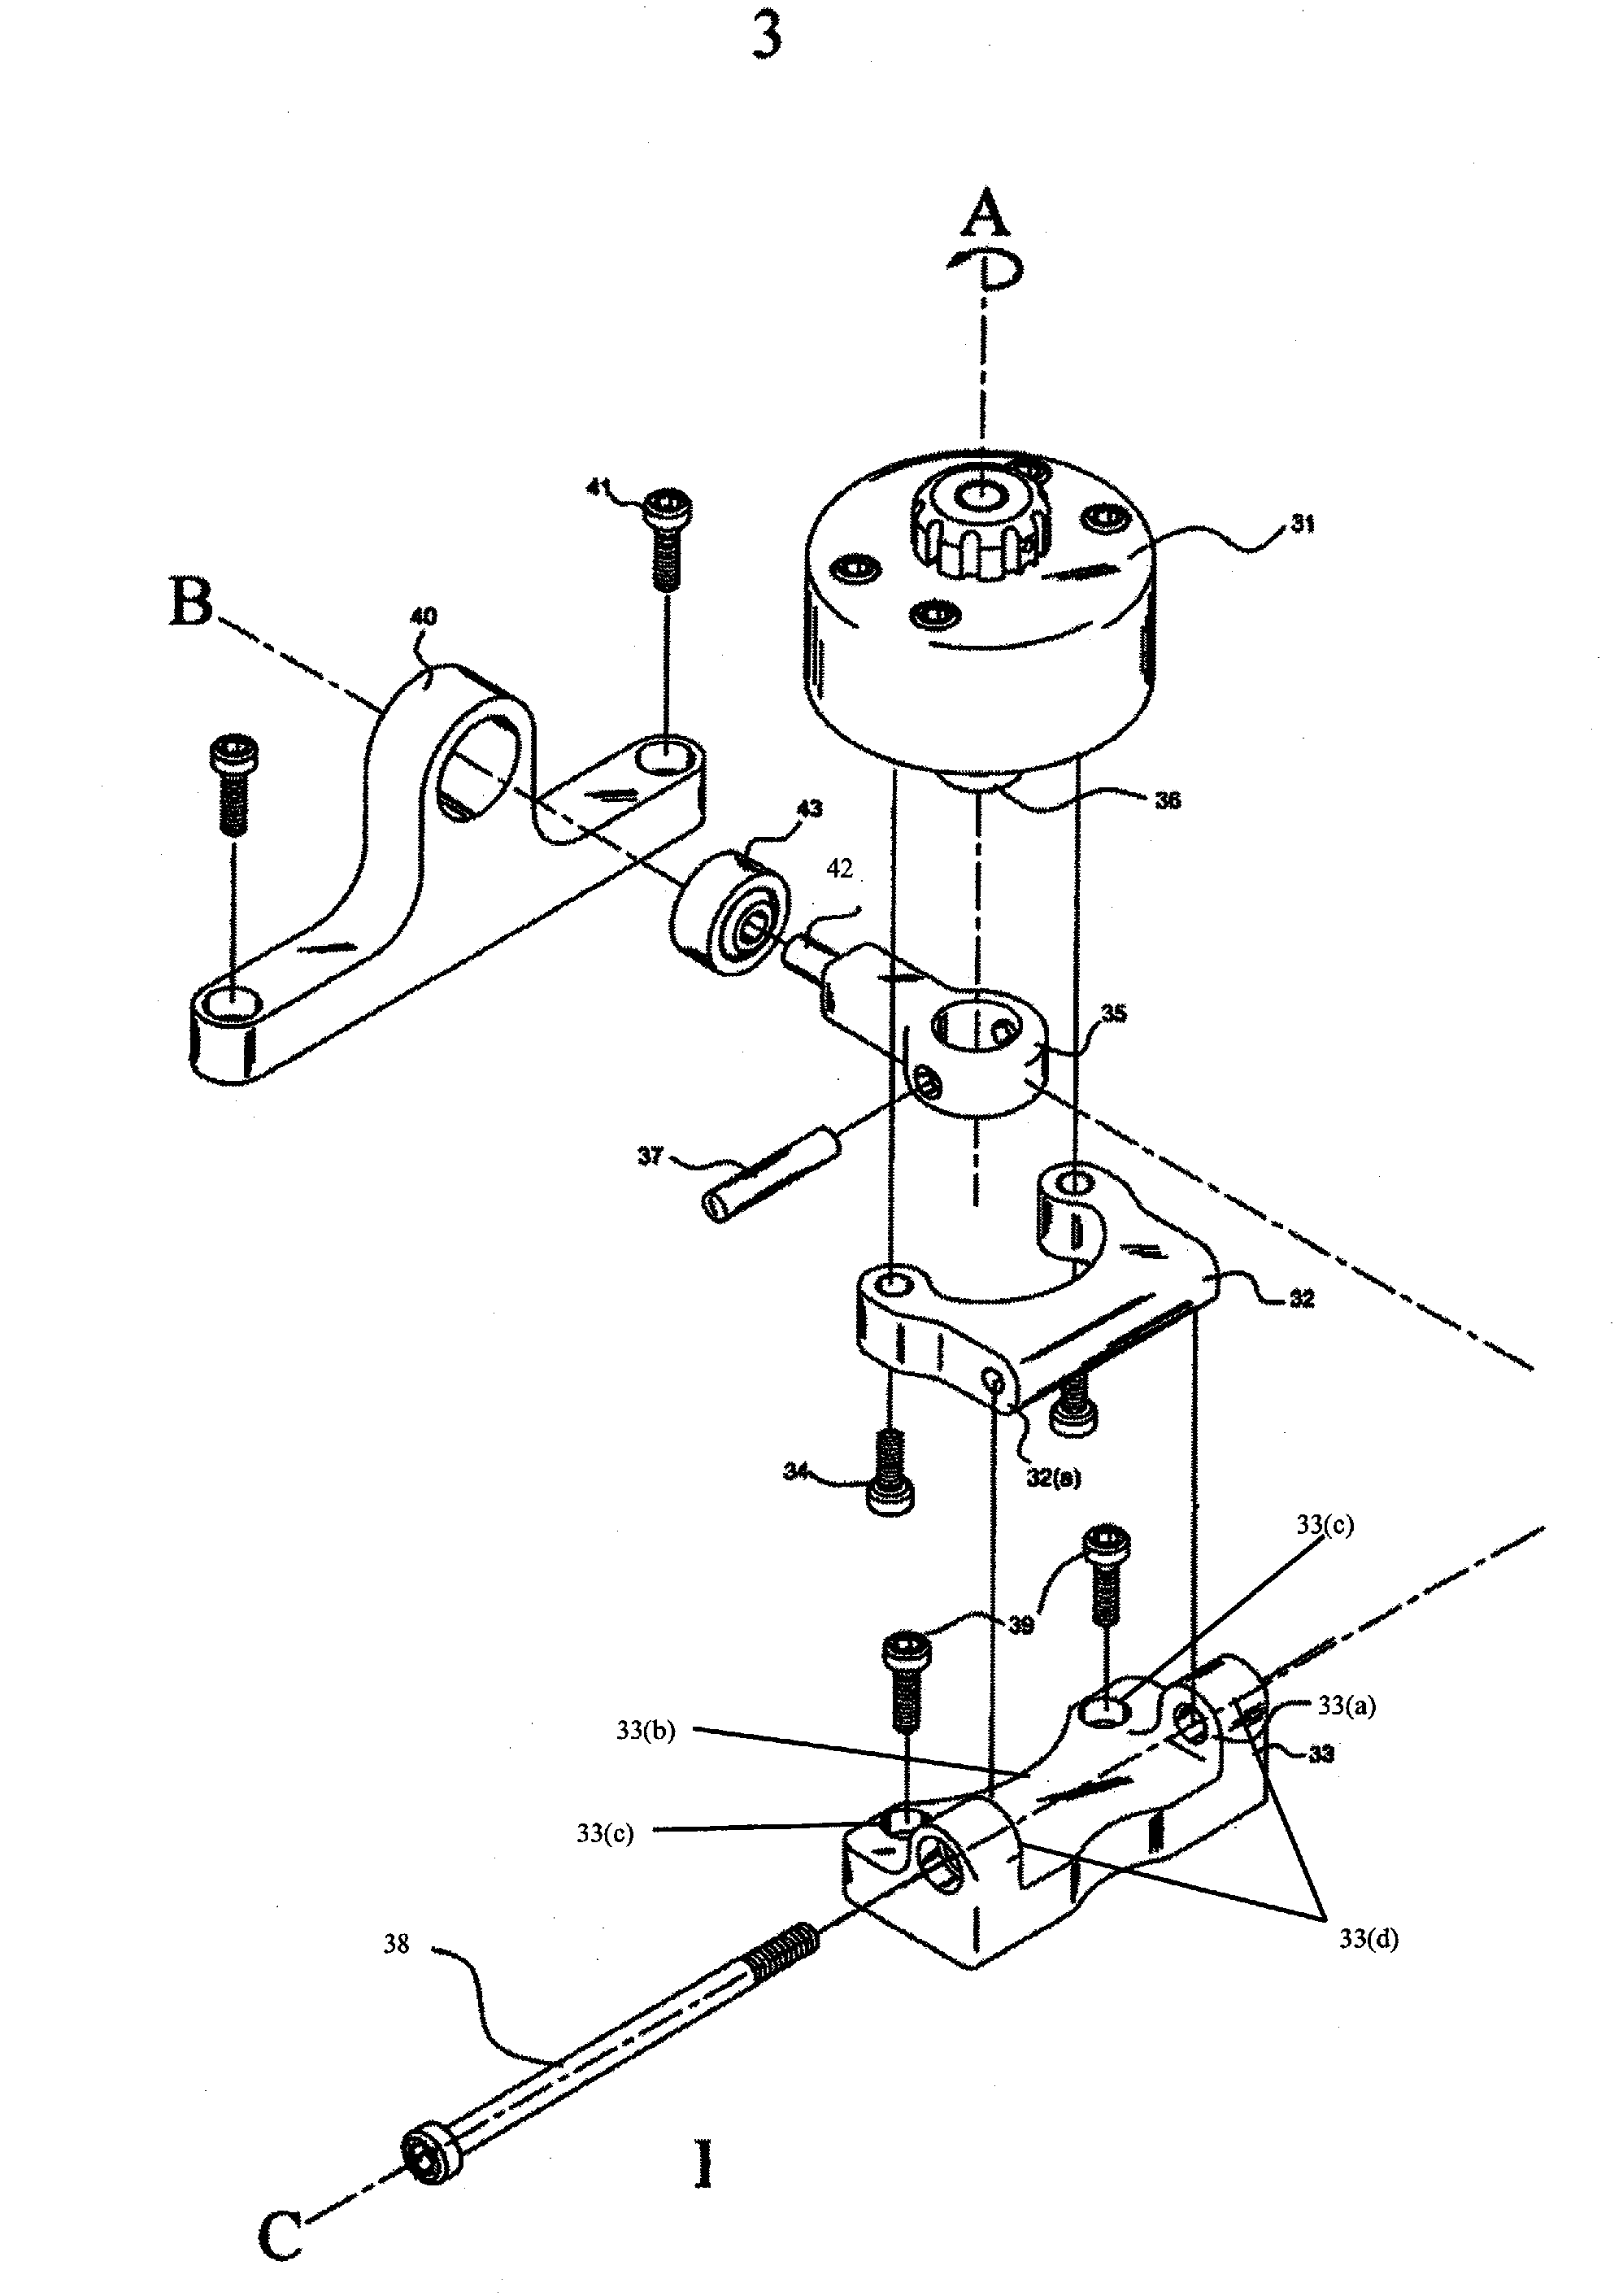 Mounting system for rotary damper